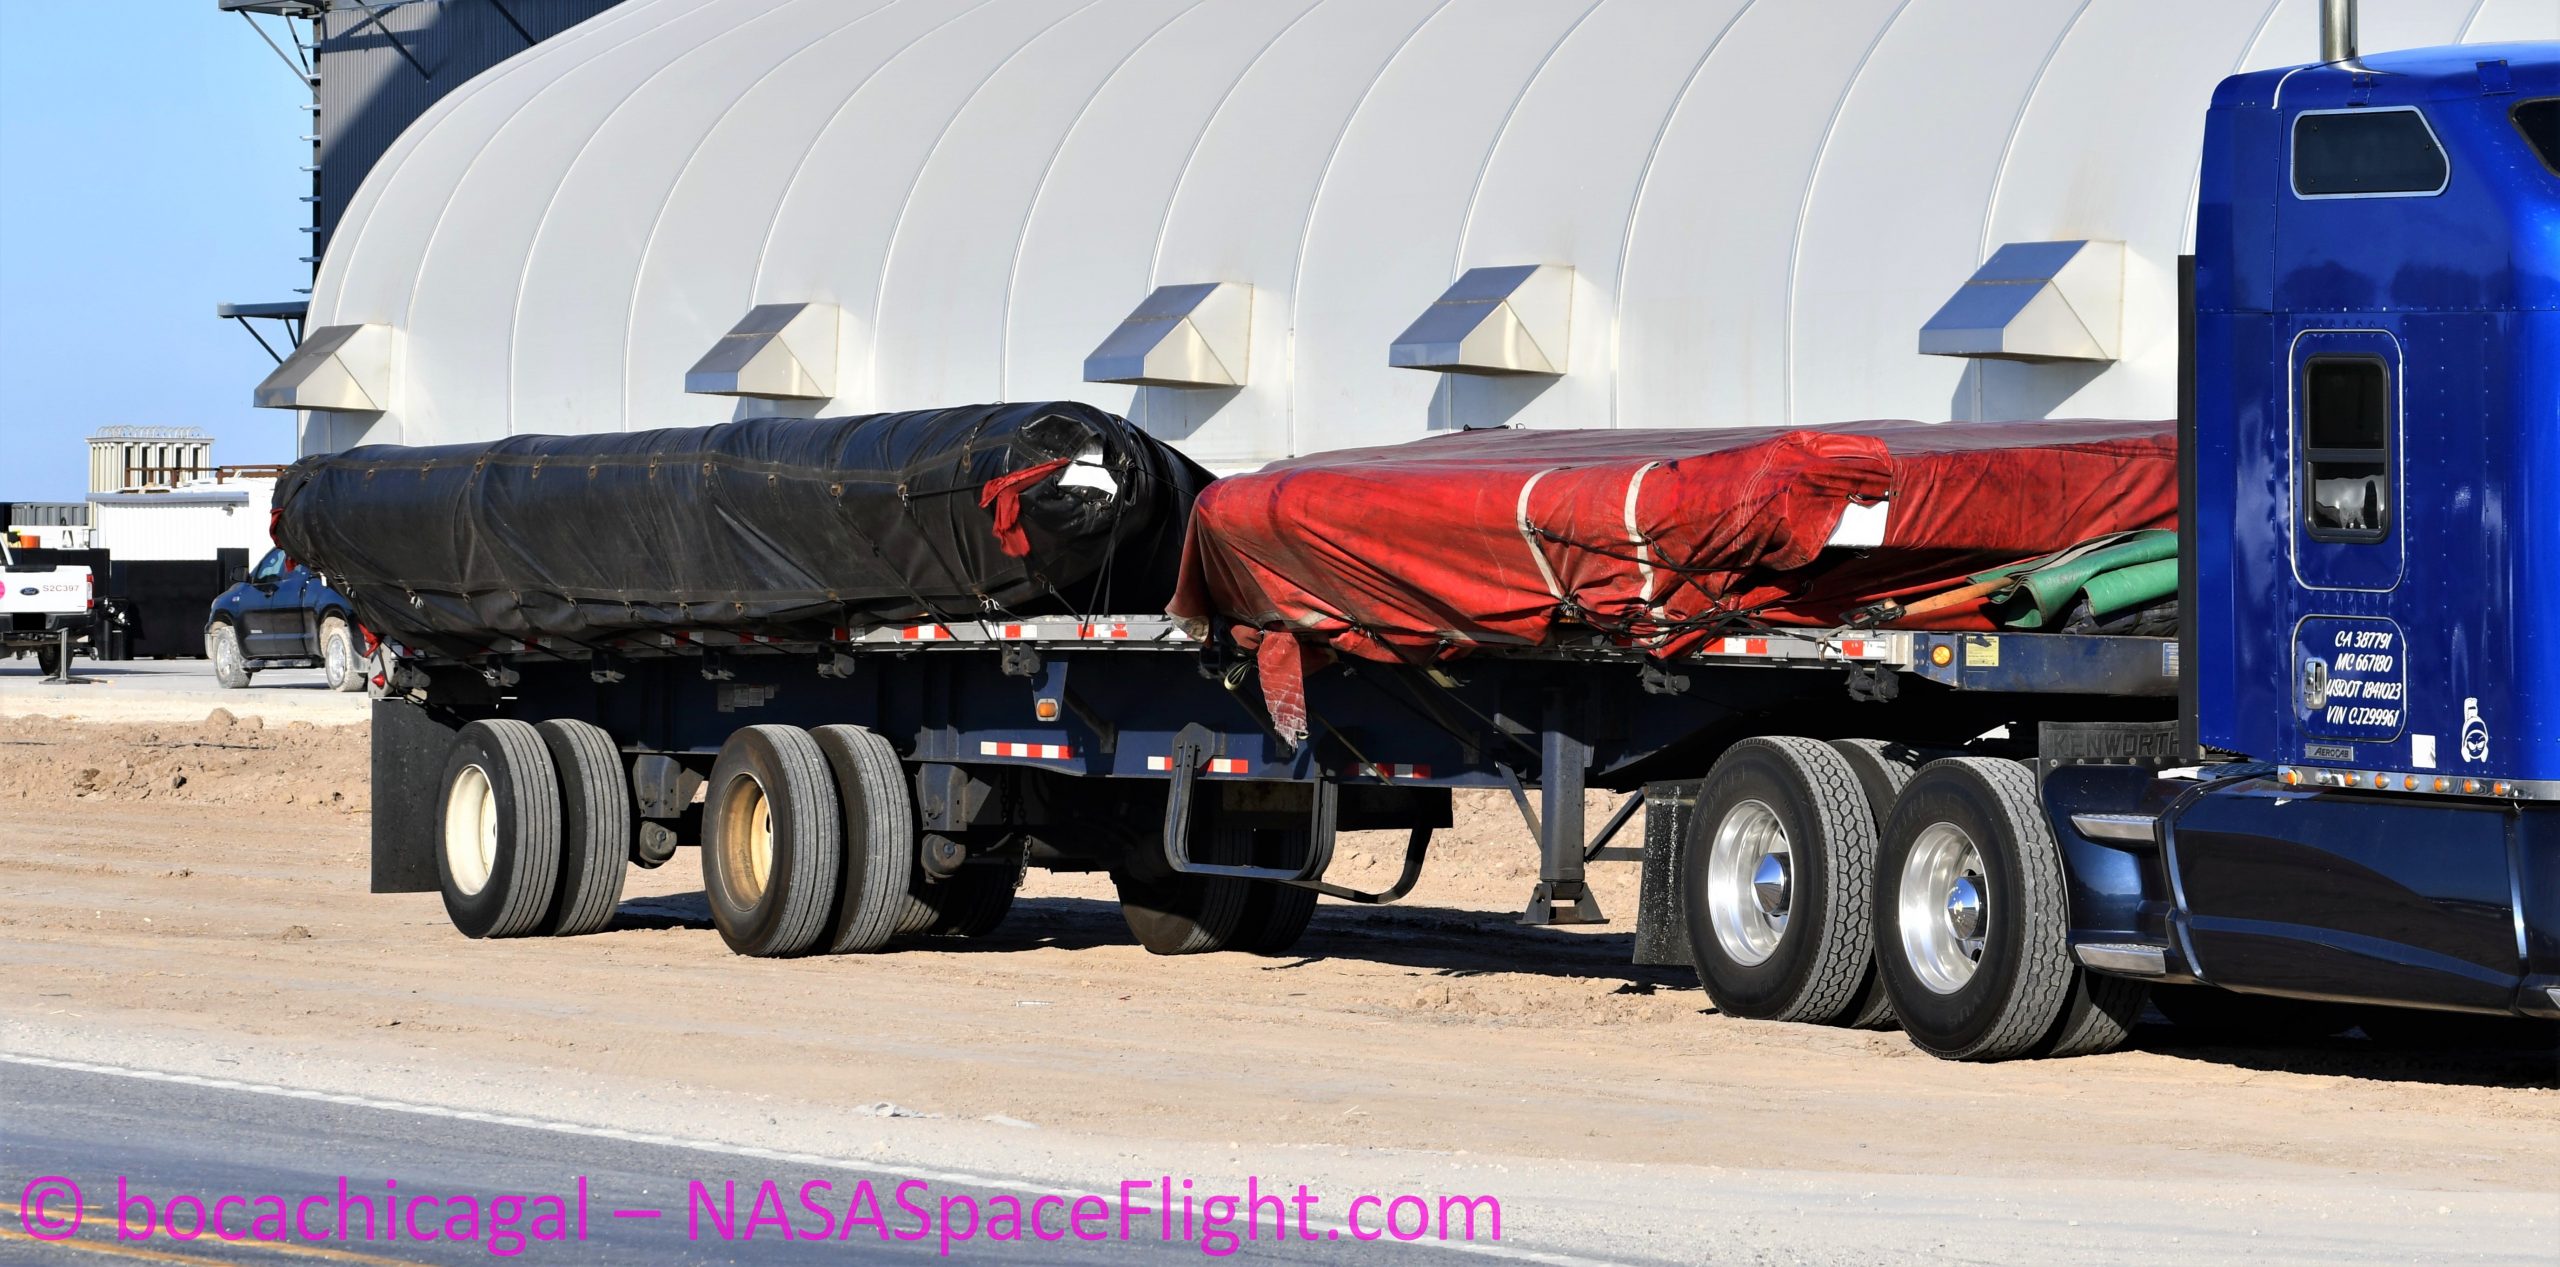 Starship Boca Chica 081520 (NASASpaceflight – bocachicagal) flaps delivery 2